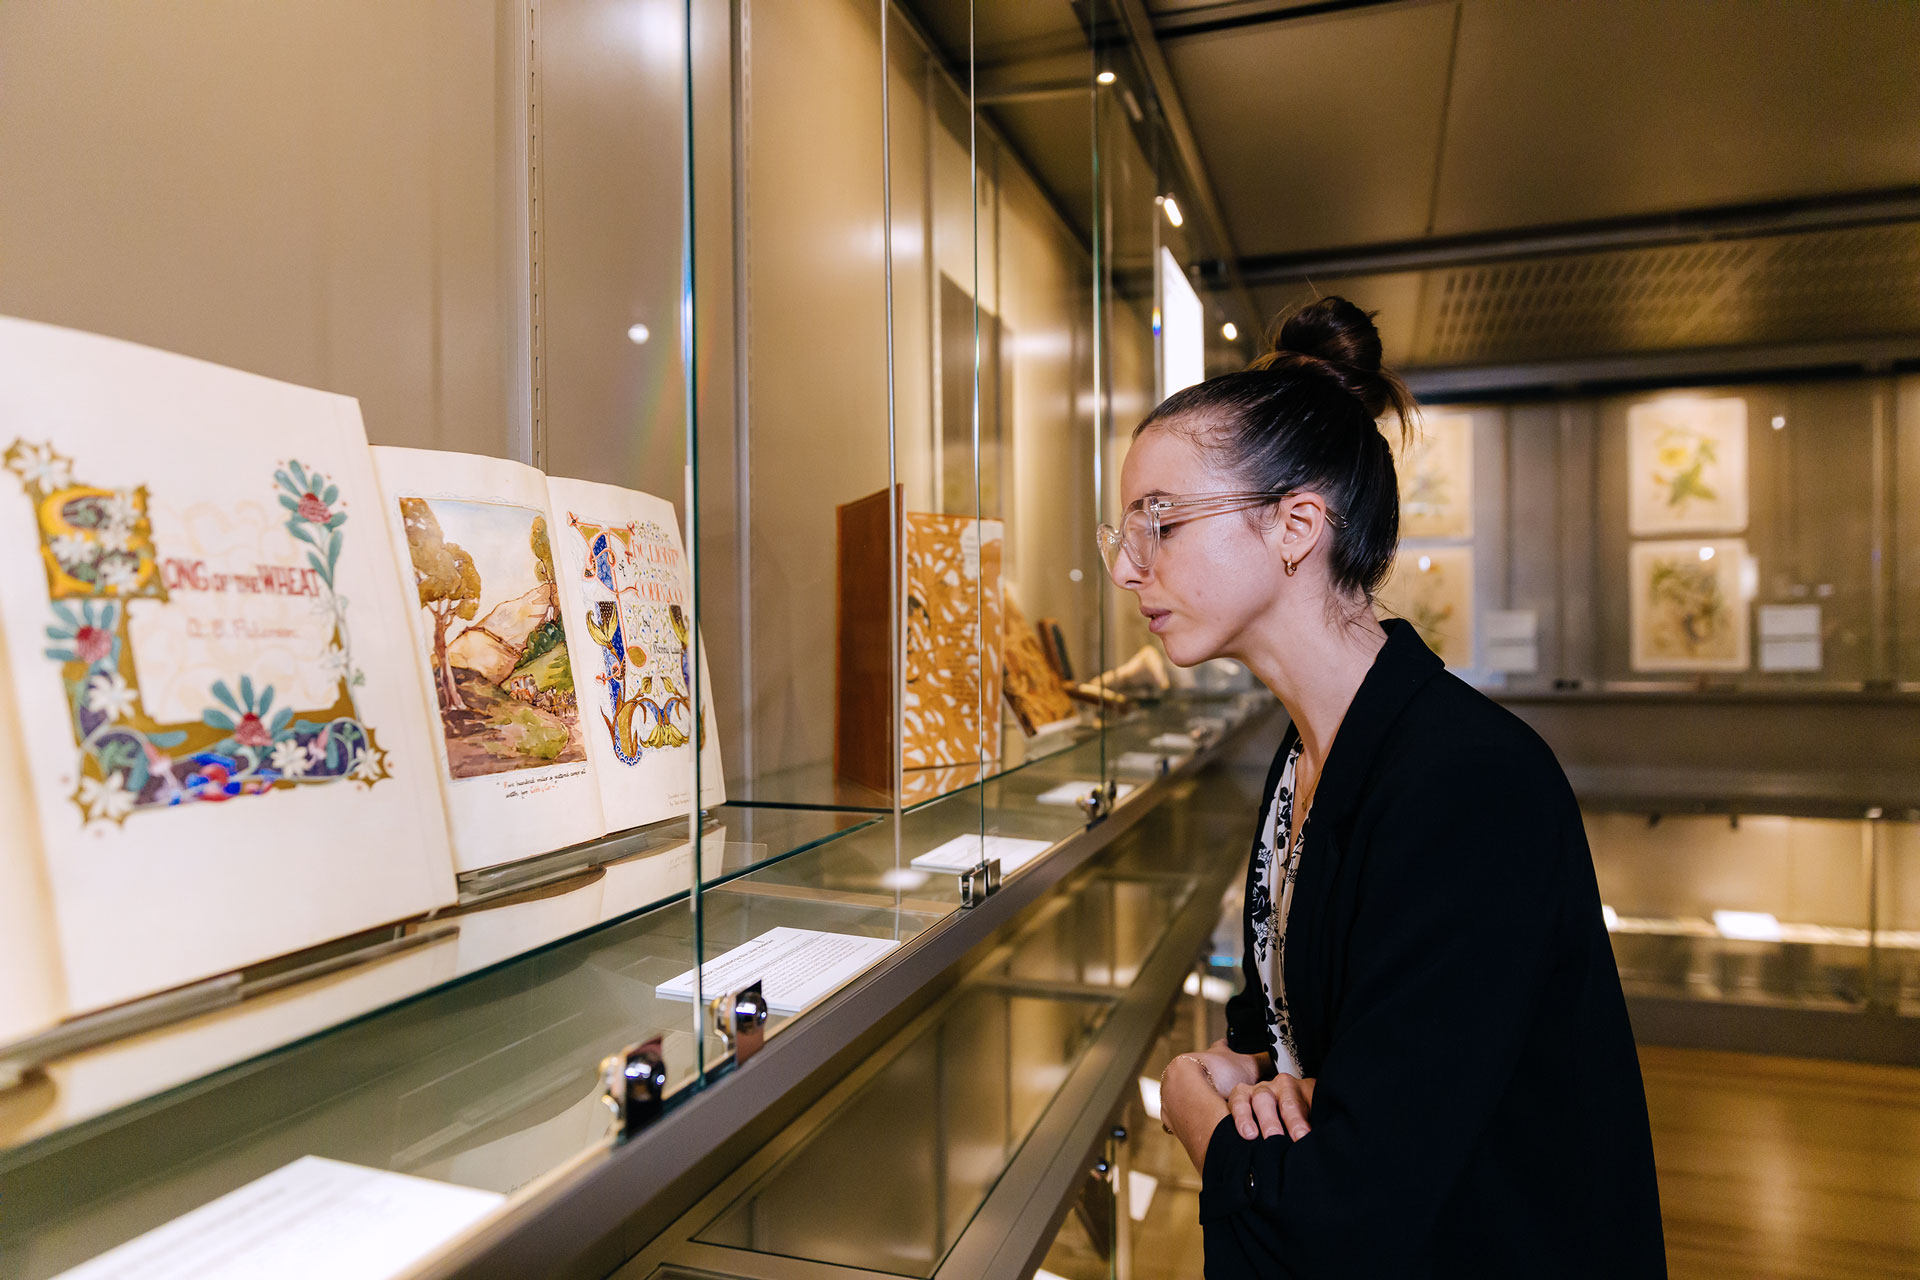 Woman looking at old illustrated book behind a glass cabinet.